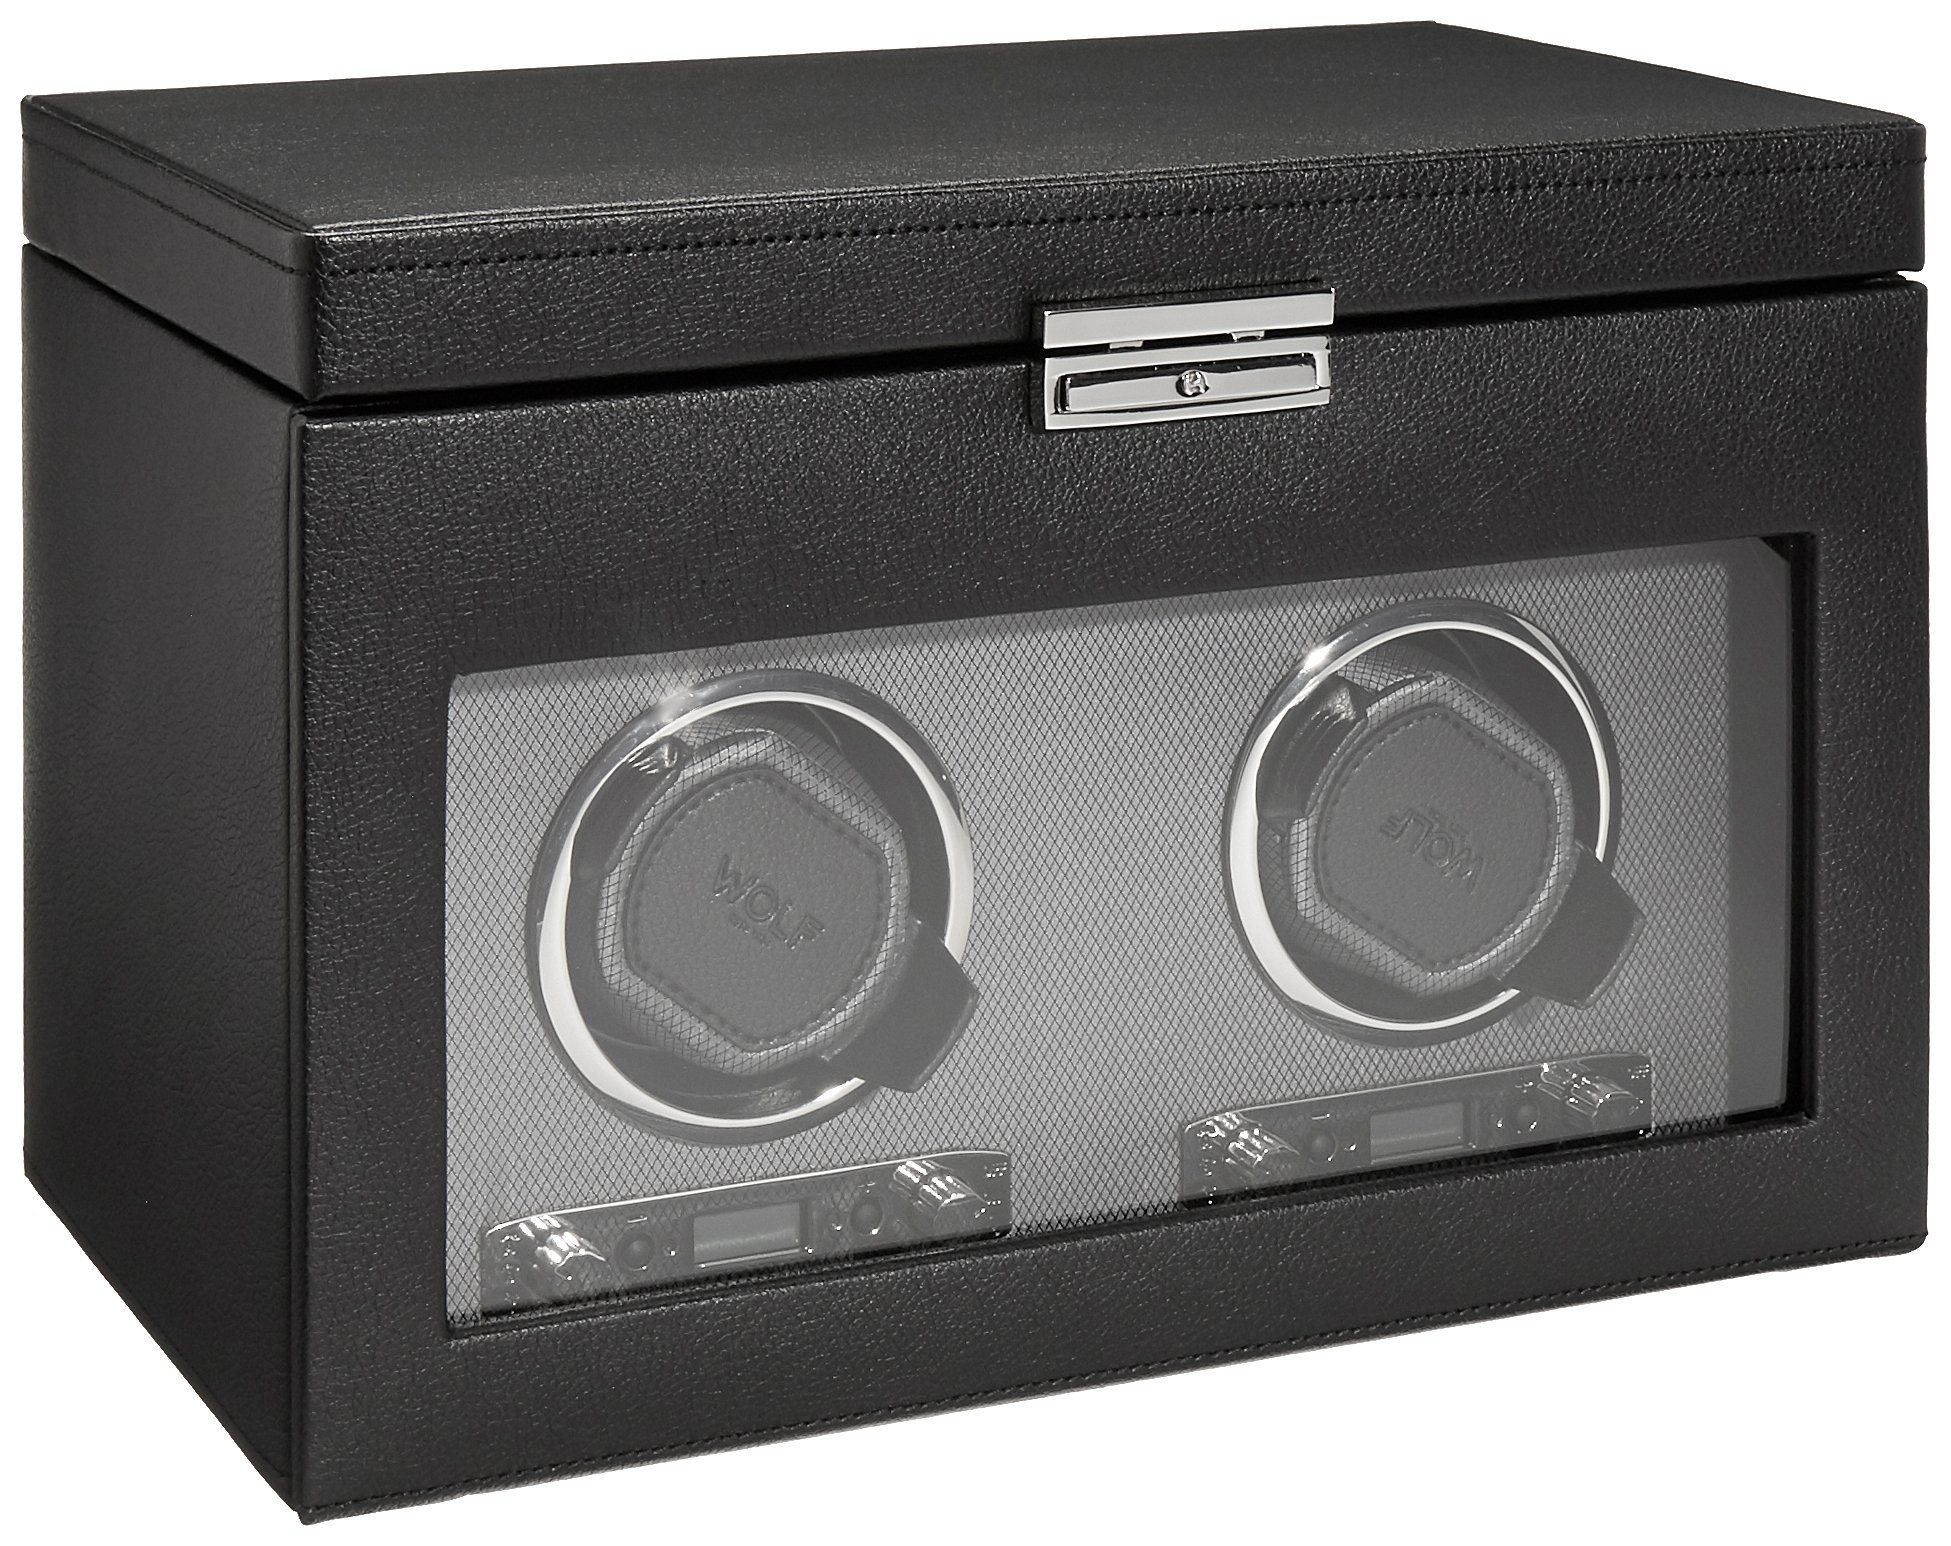 WOLF 456202 Viceroy Double Watch Winder with Cover and Storage, Black